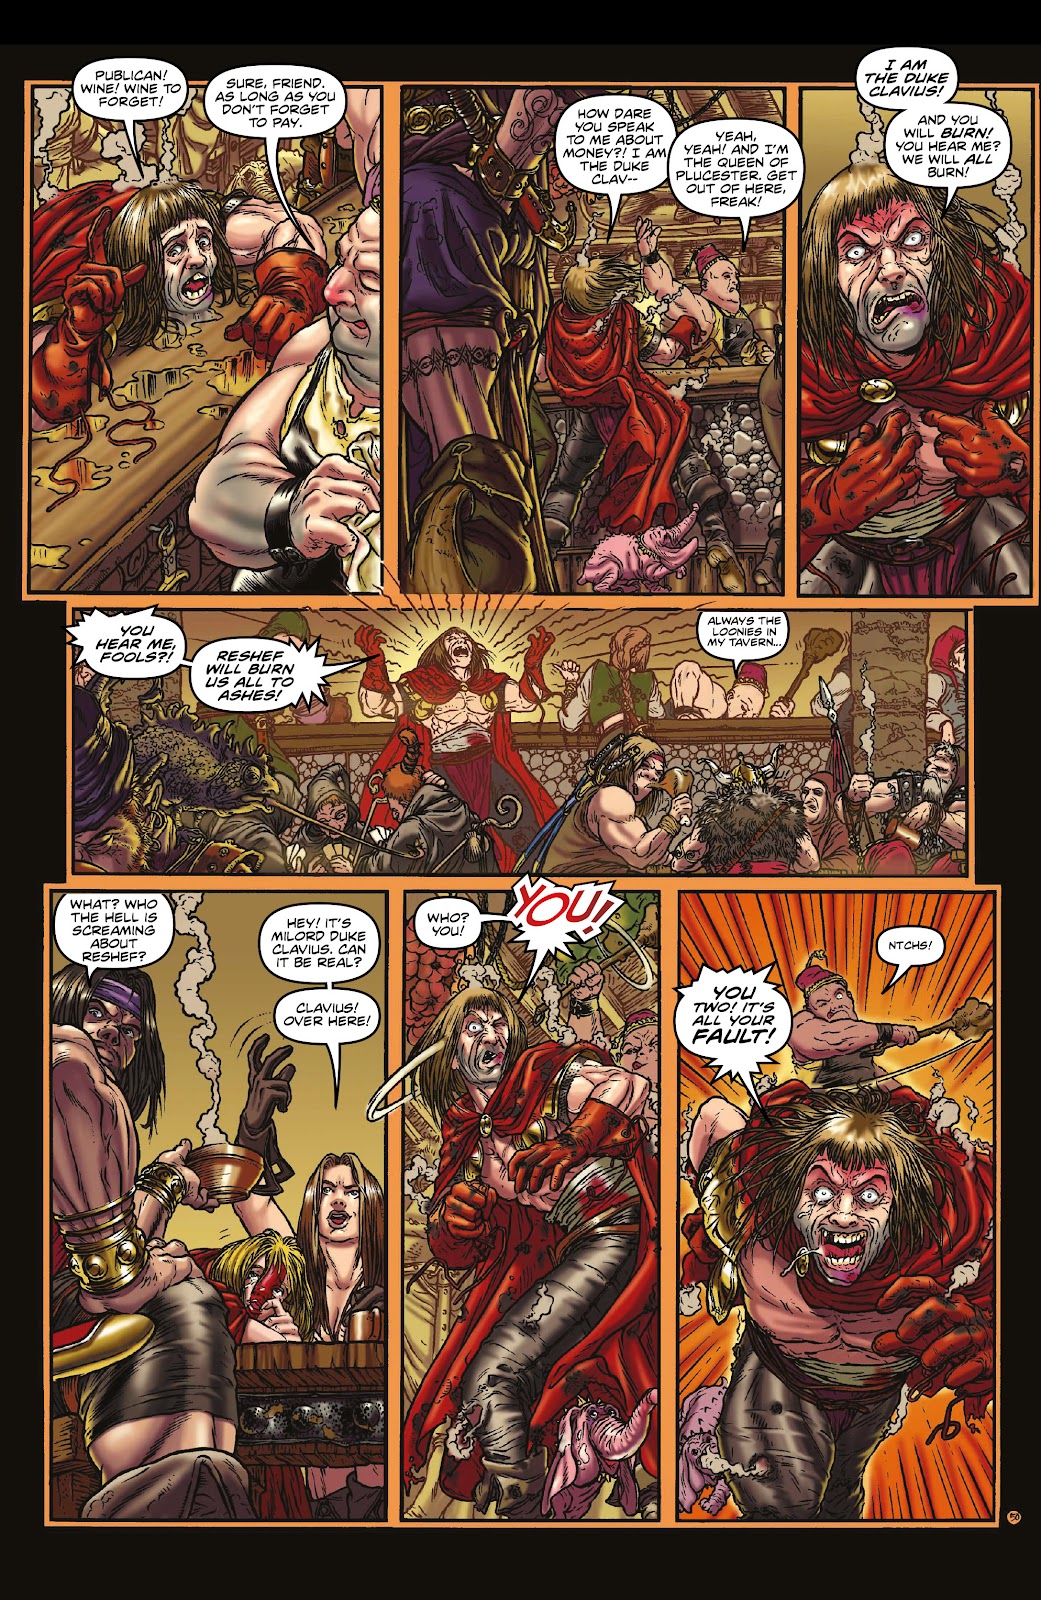 Rogues!: The Burning Heart issue 3 - Page 8